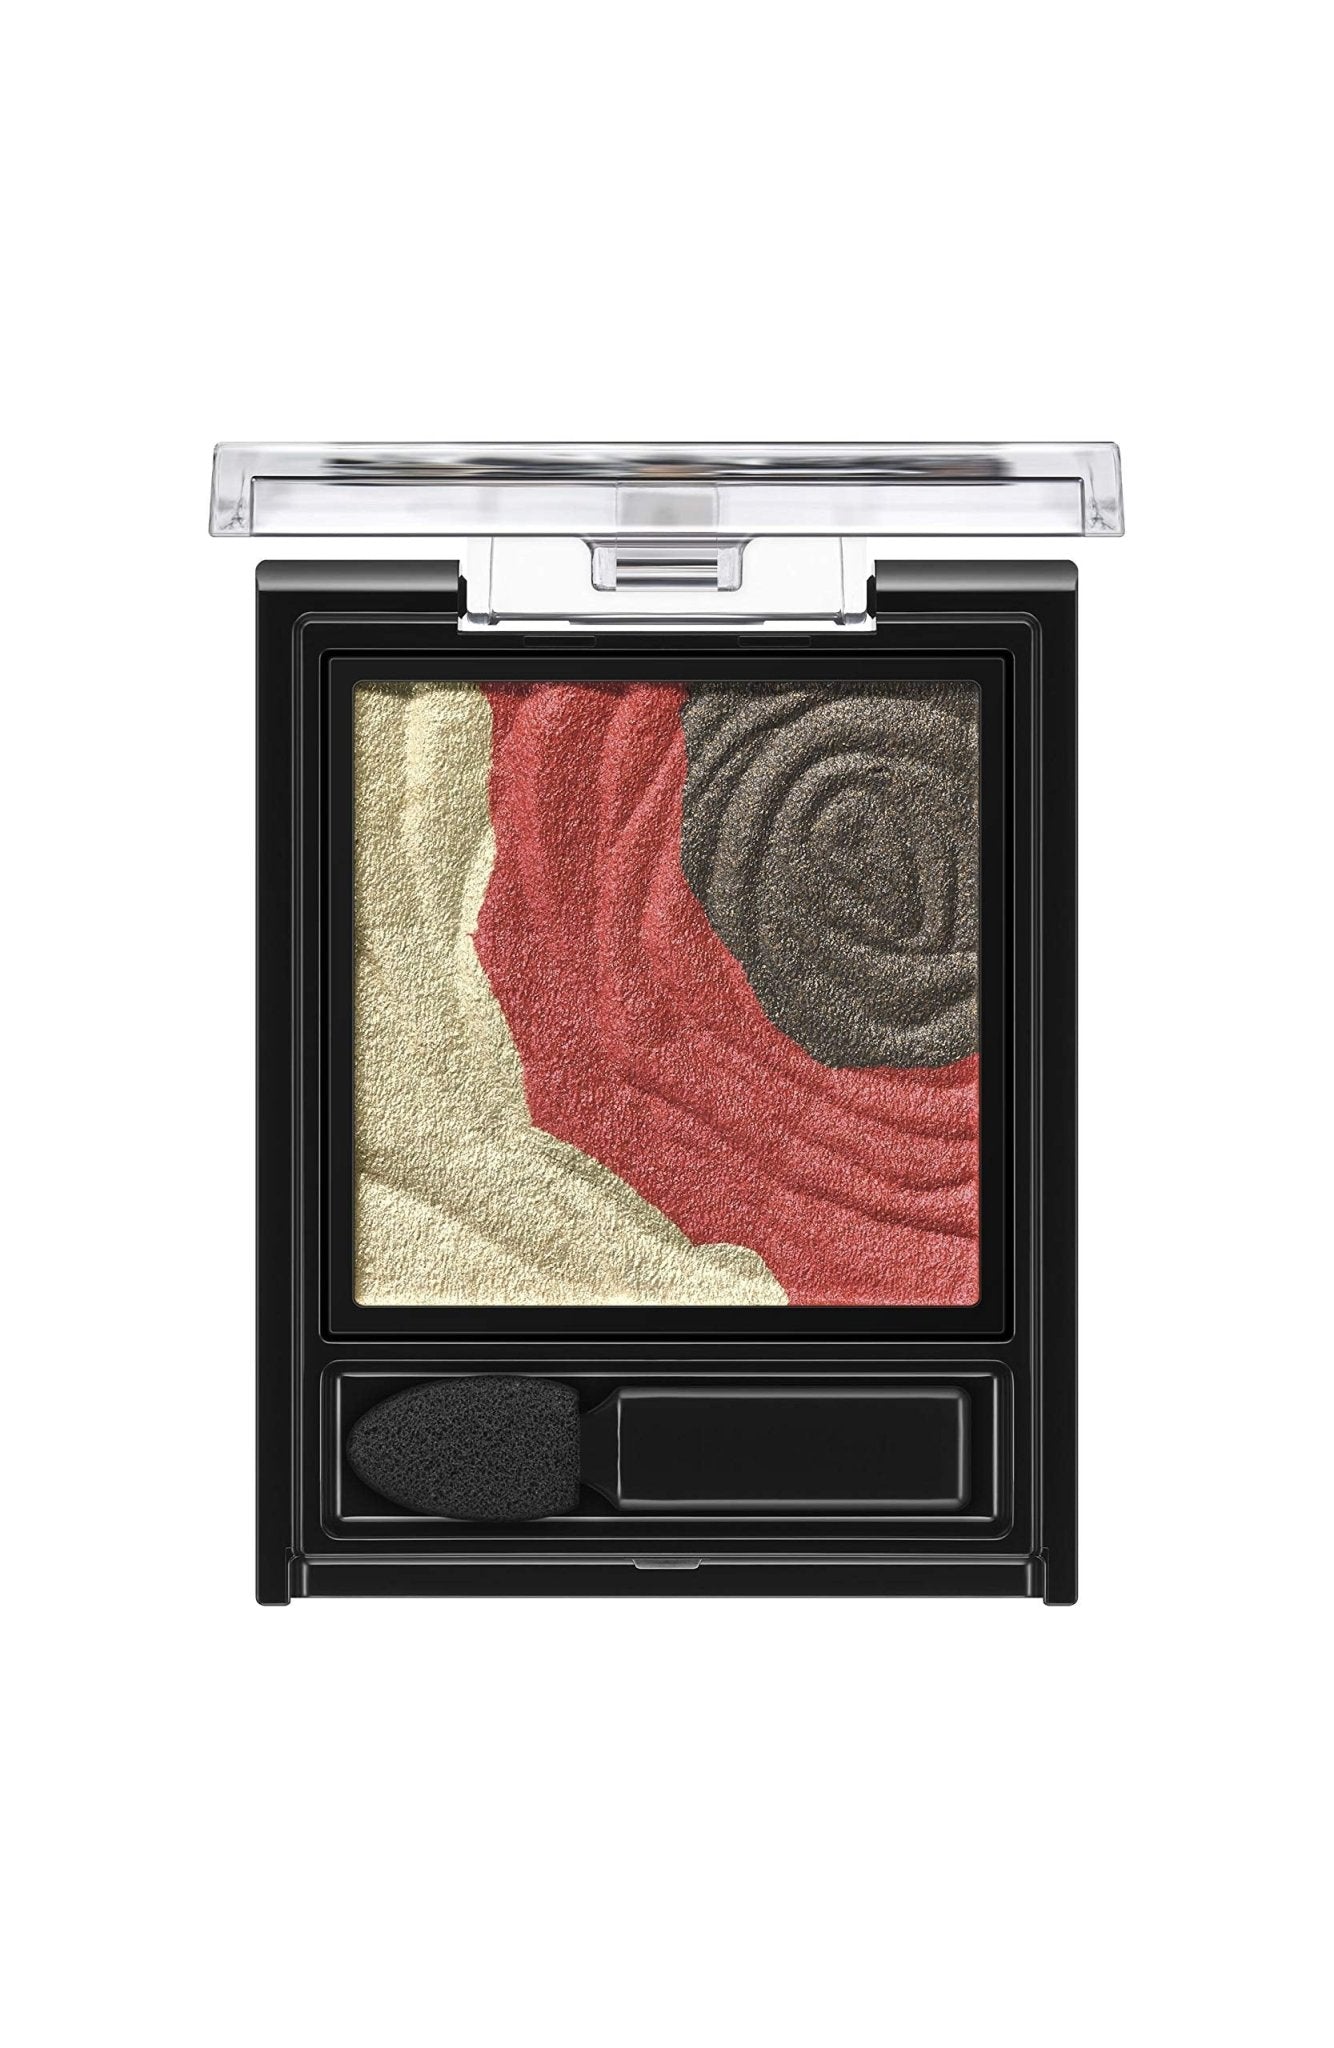 Kate Rd - 2 Dark Rose Eye Shadow - Rich and Vibrant Matte Finish